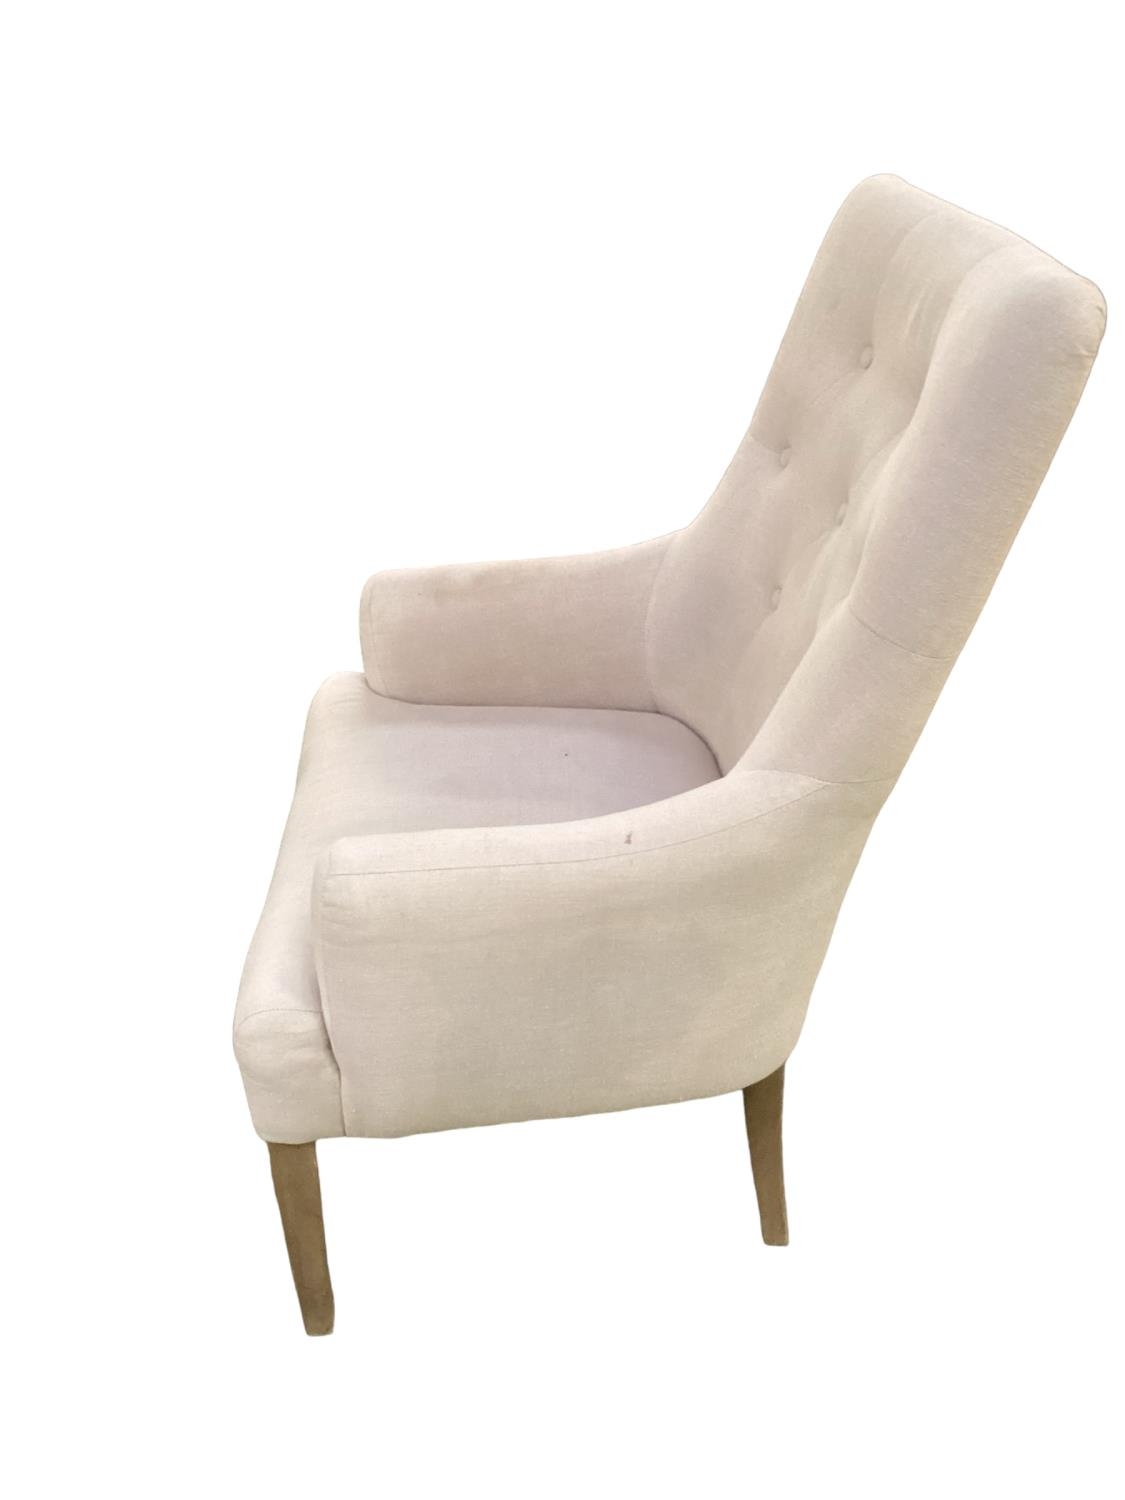 A modern cream upholstered button back chair, raised on wooden feet, some areas of wear/marks - Image 3 of 3